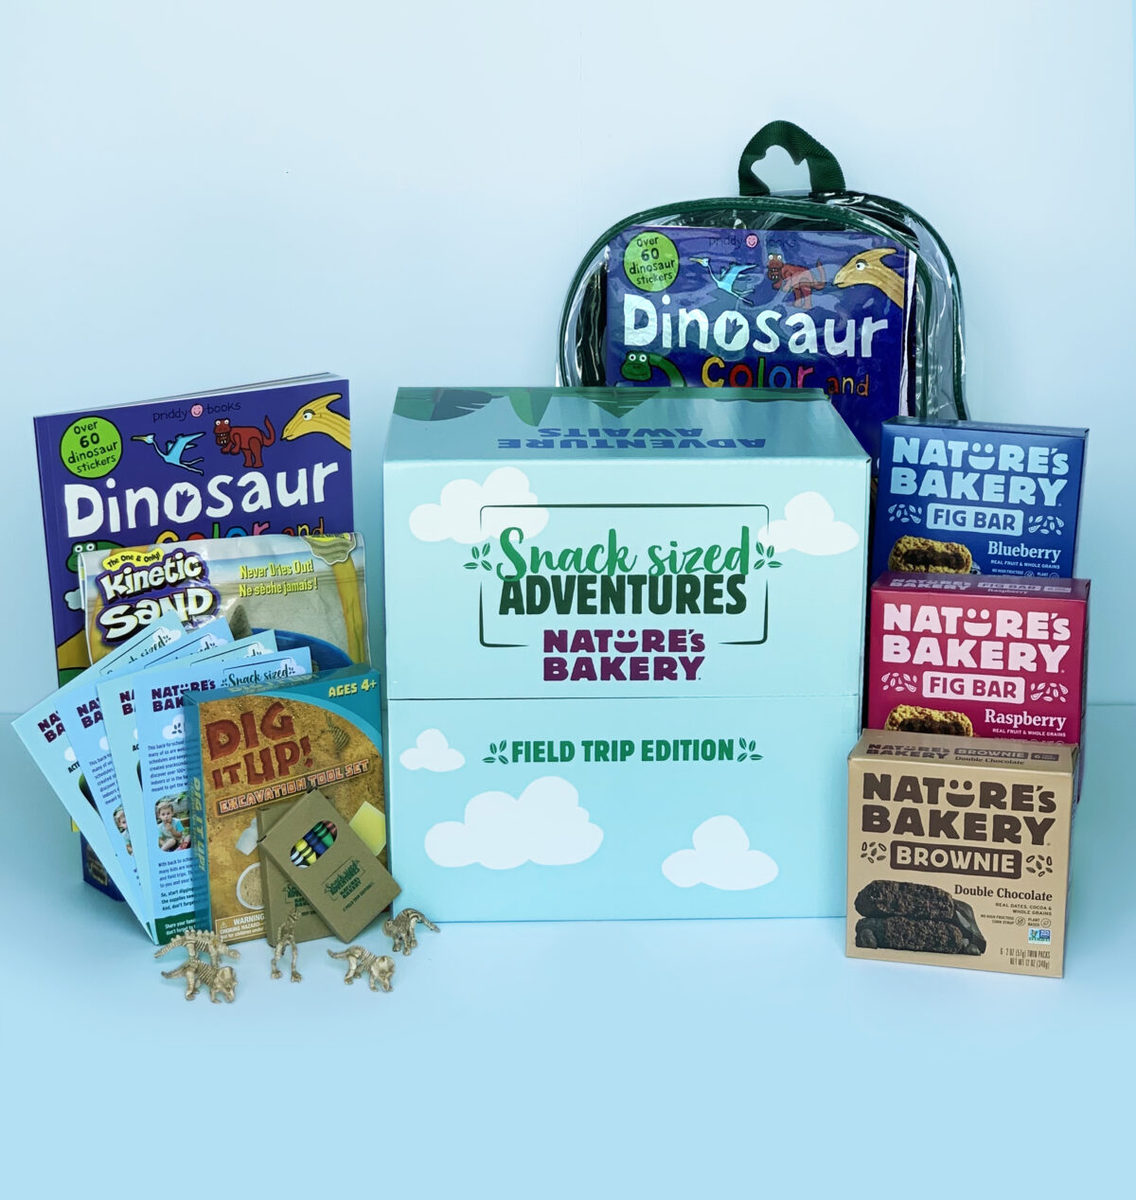 Nature’s Bakery Offers Families The Ultimate Field Trip Solution This School Year (It’s Dino-Mite)!